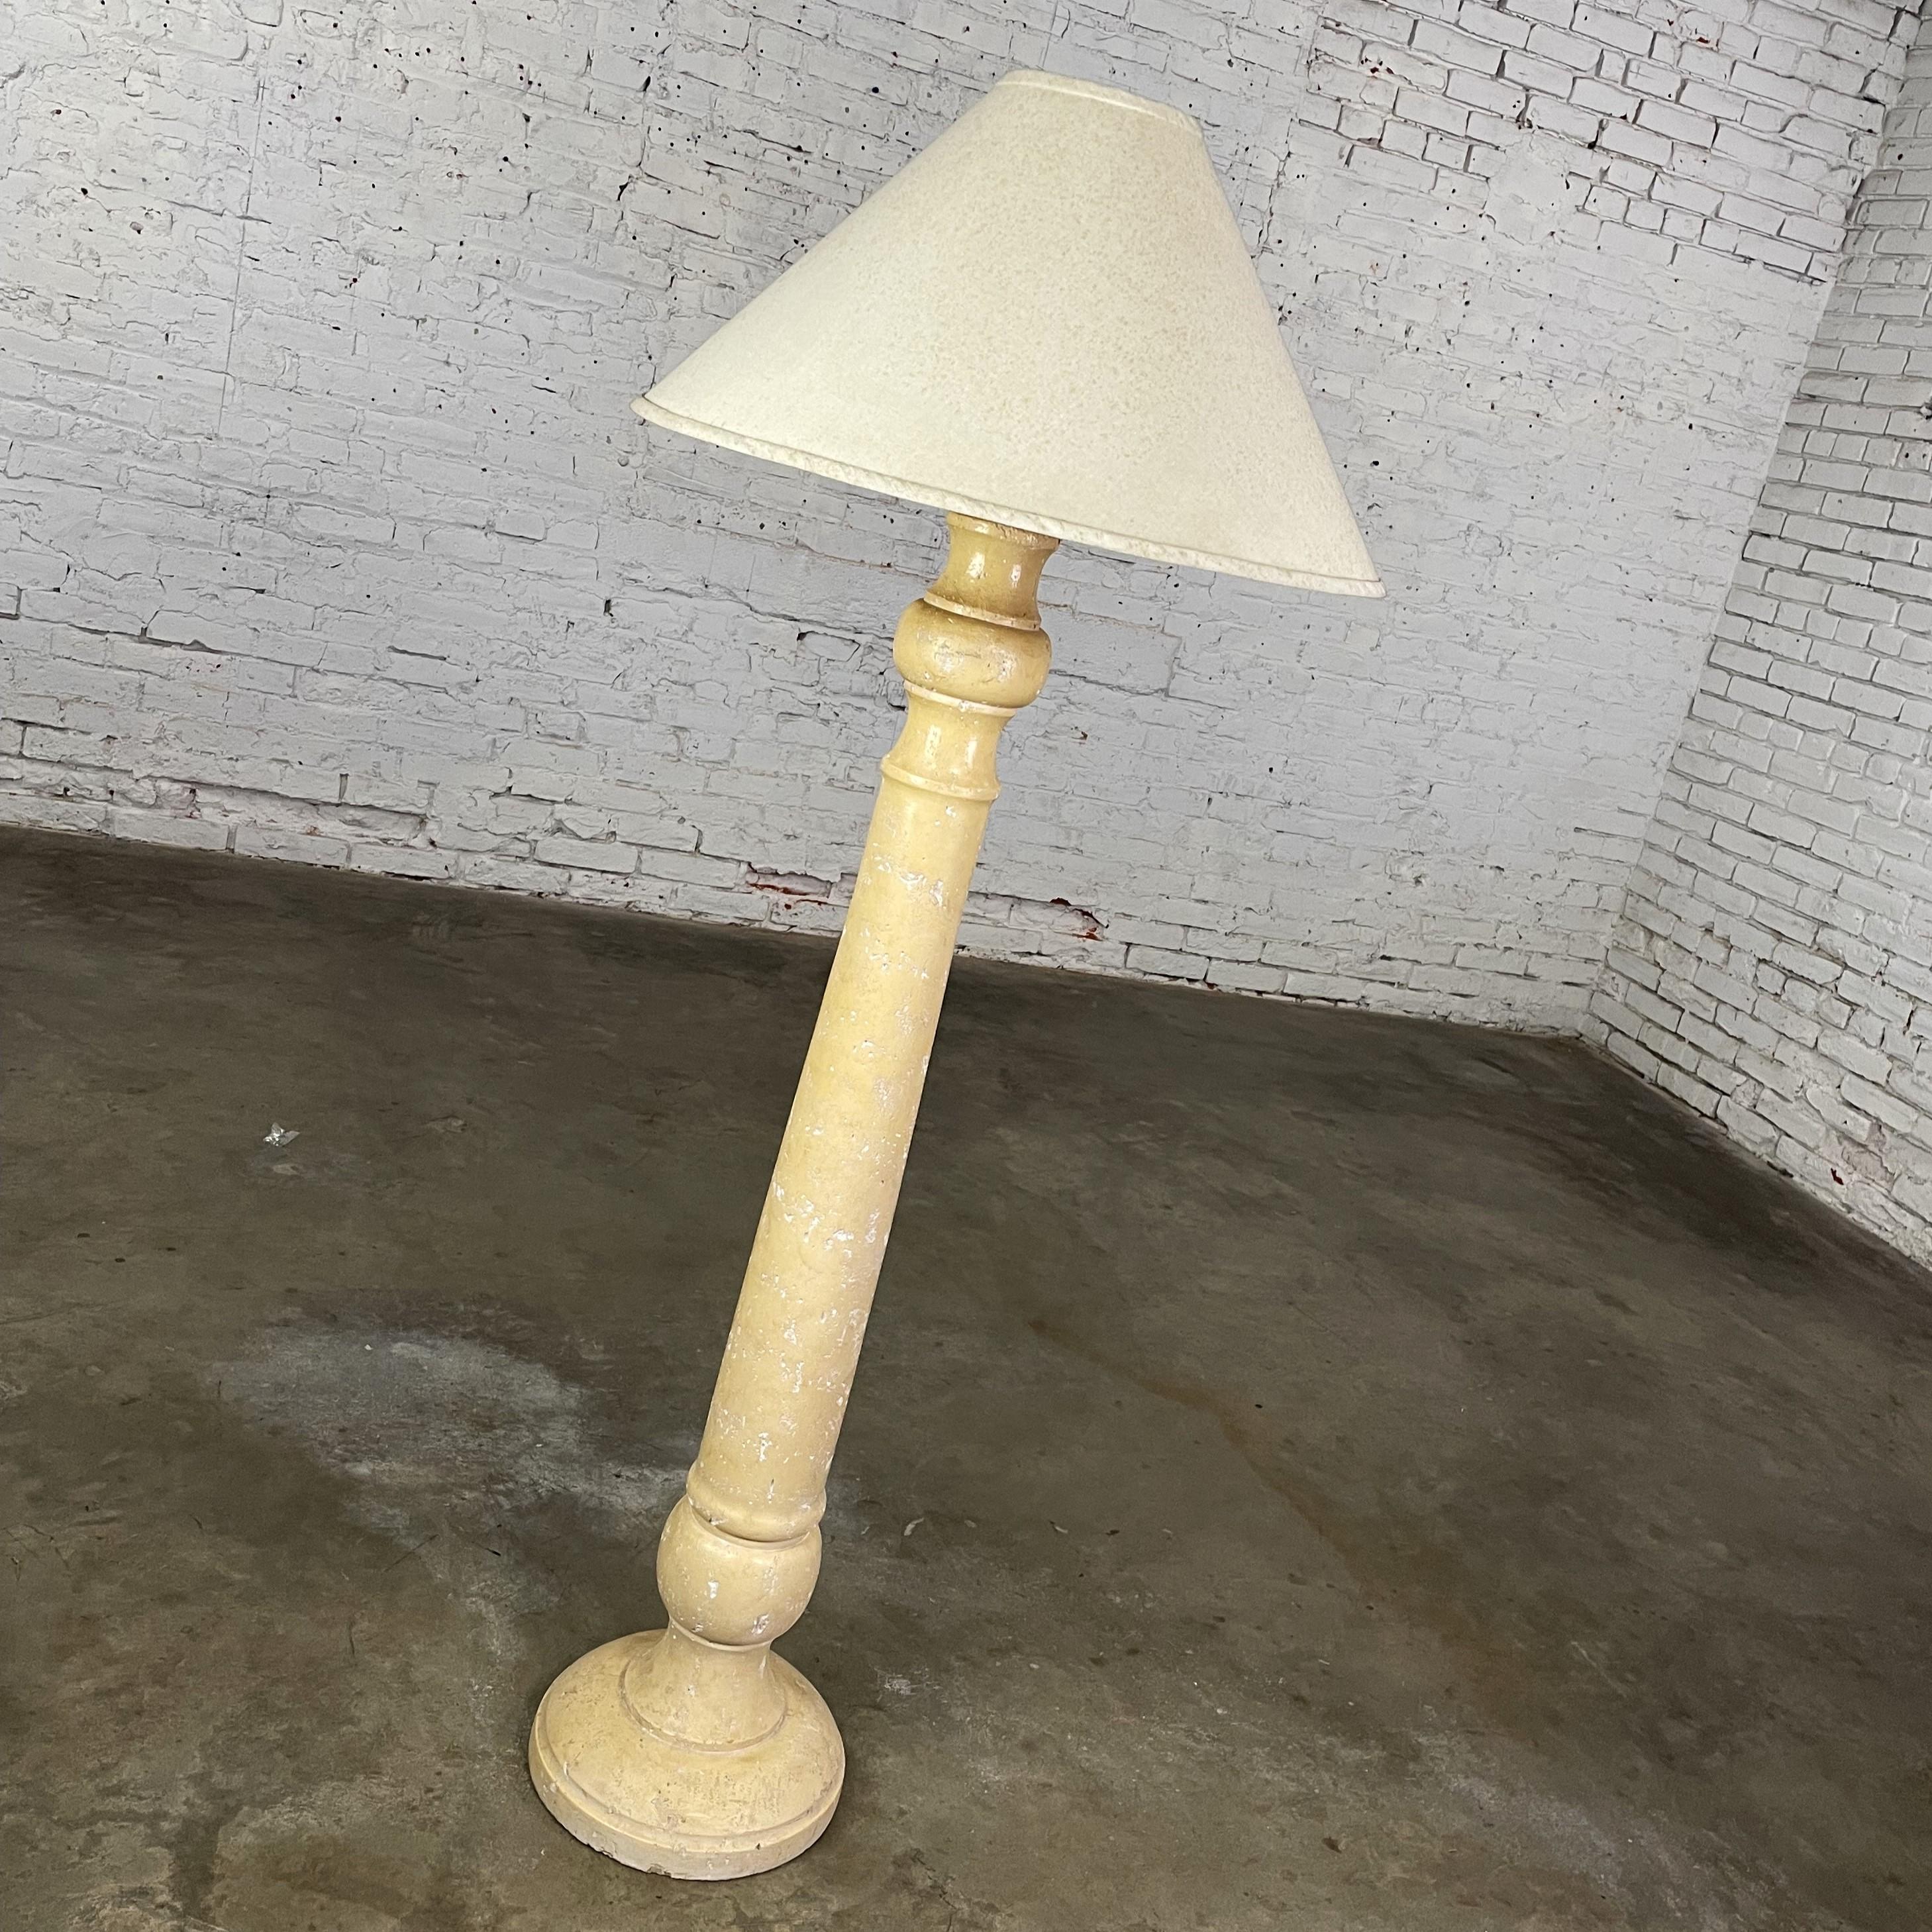 20th Century Late 20th Column Floor Lamp Faux Travertine Plaster Finish & Orig Coolie Shade For Sale